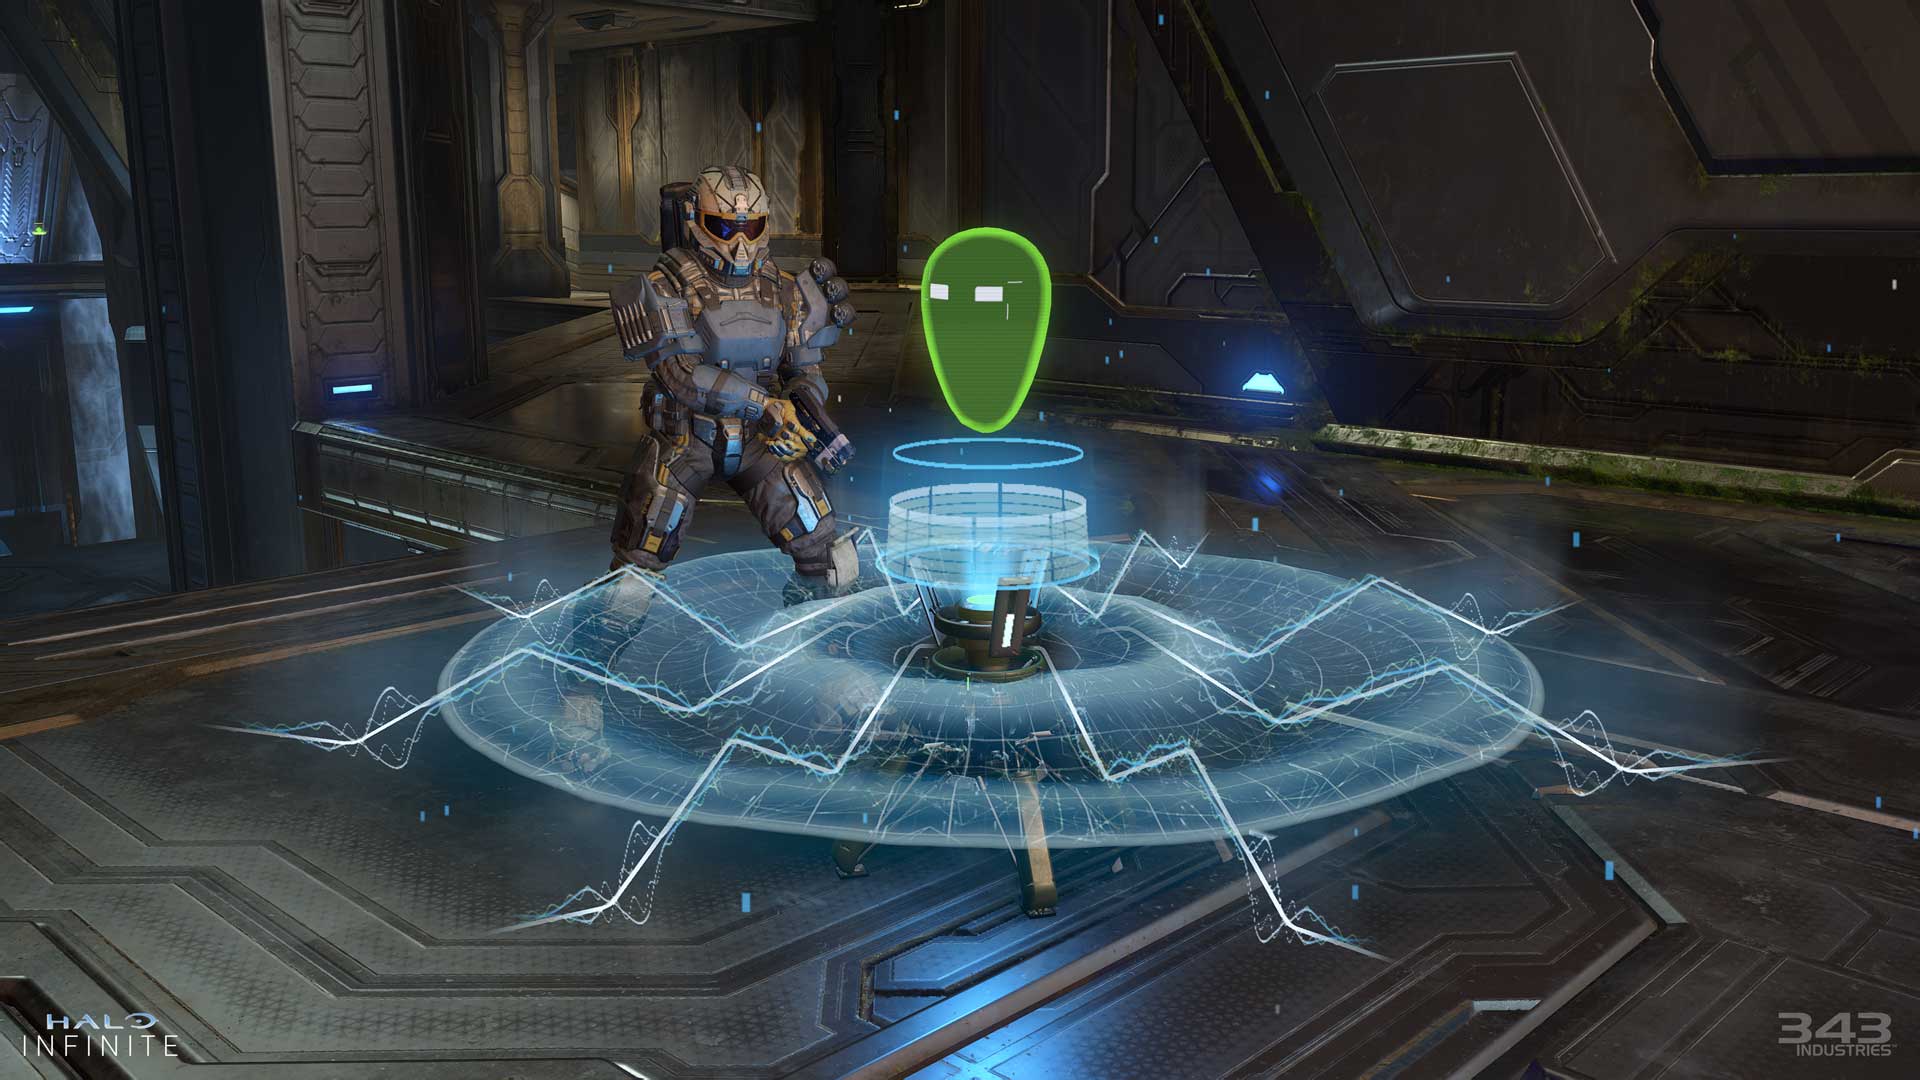 Spartan multiplayer playing Extraction in Halo Infinite. 